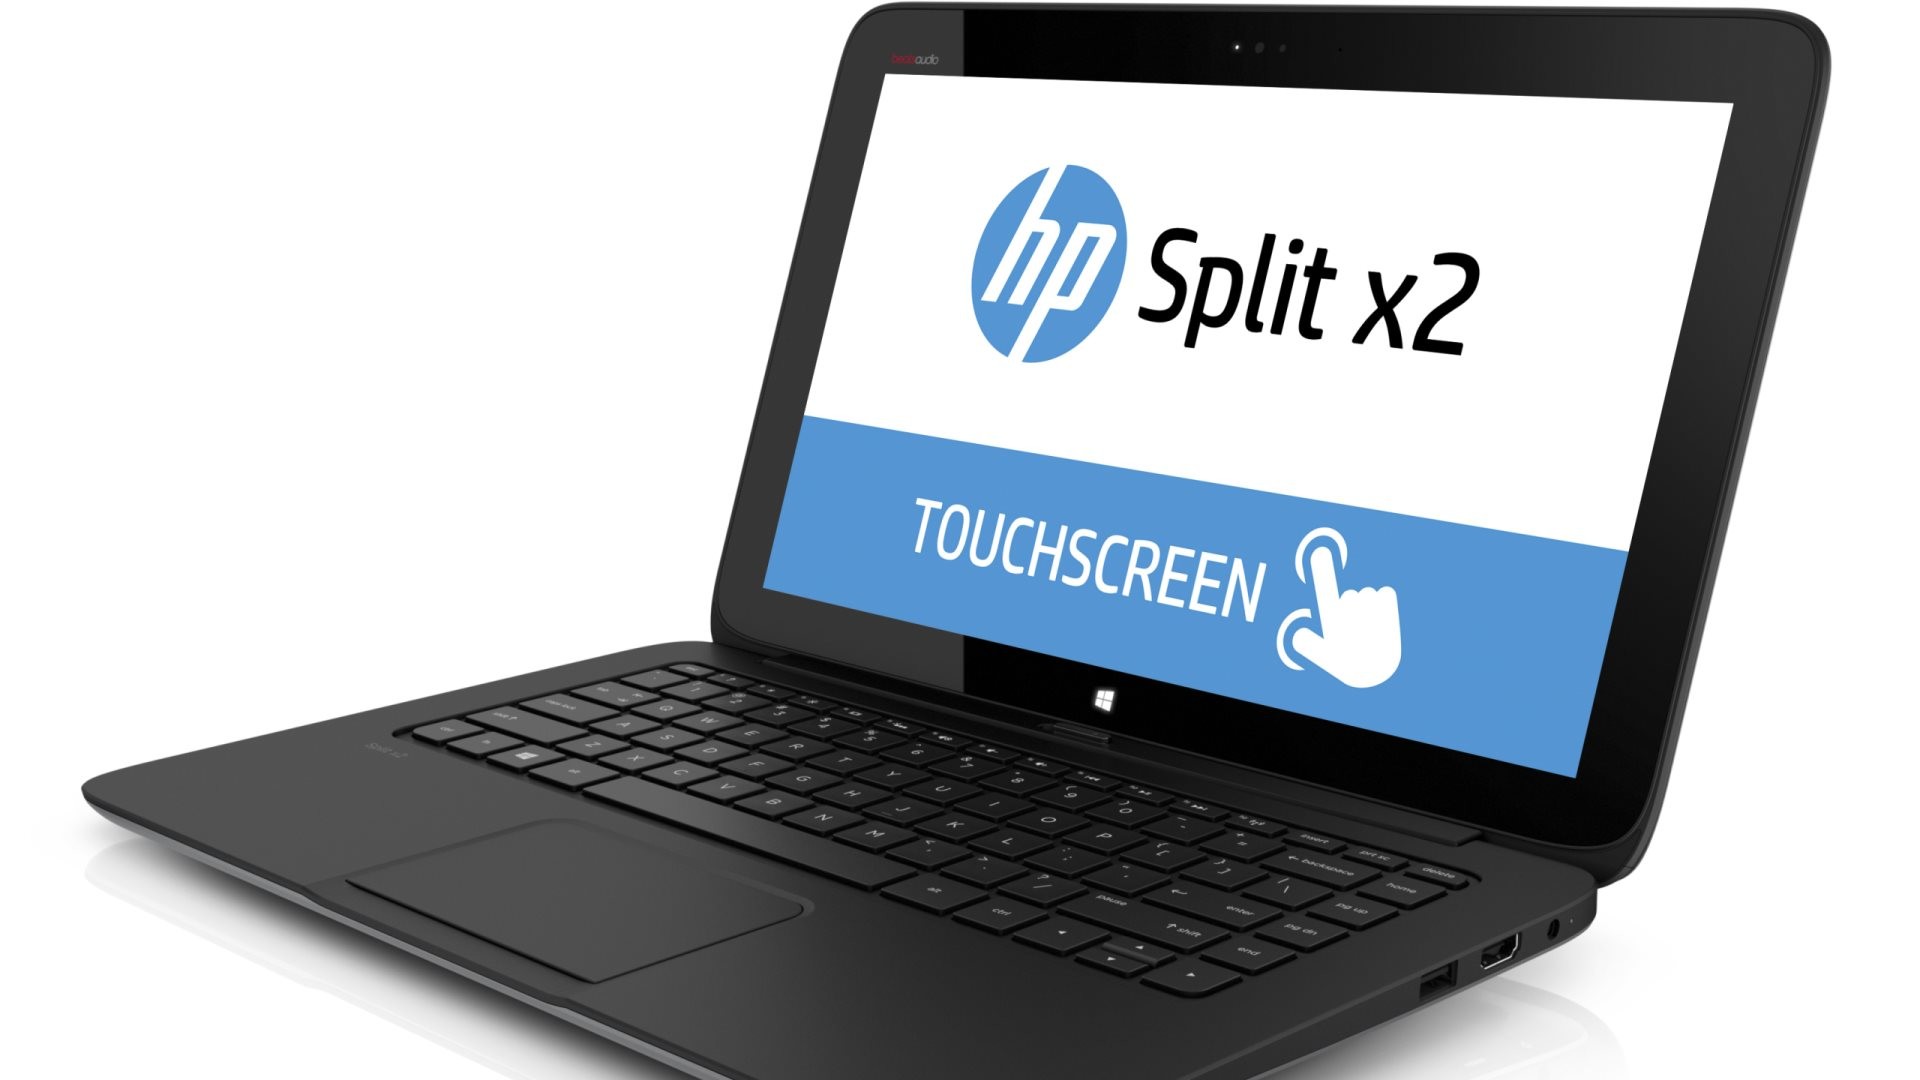 HD Wallpaper Hewlett Packard Split x2 tablet notebook has a 2 in 1 design to easily go from a powerful notebook to a portable tablet. Widescreen